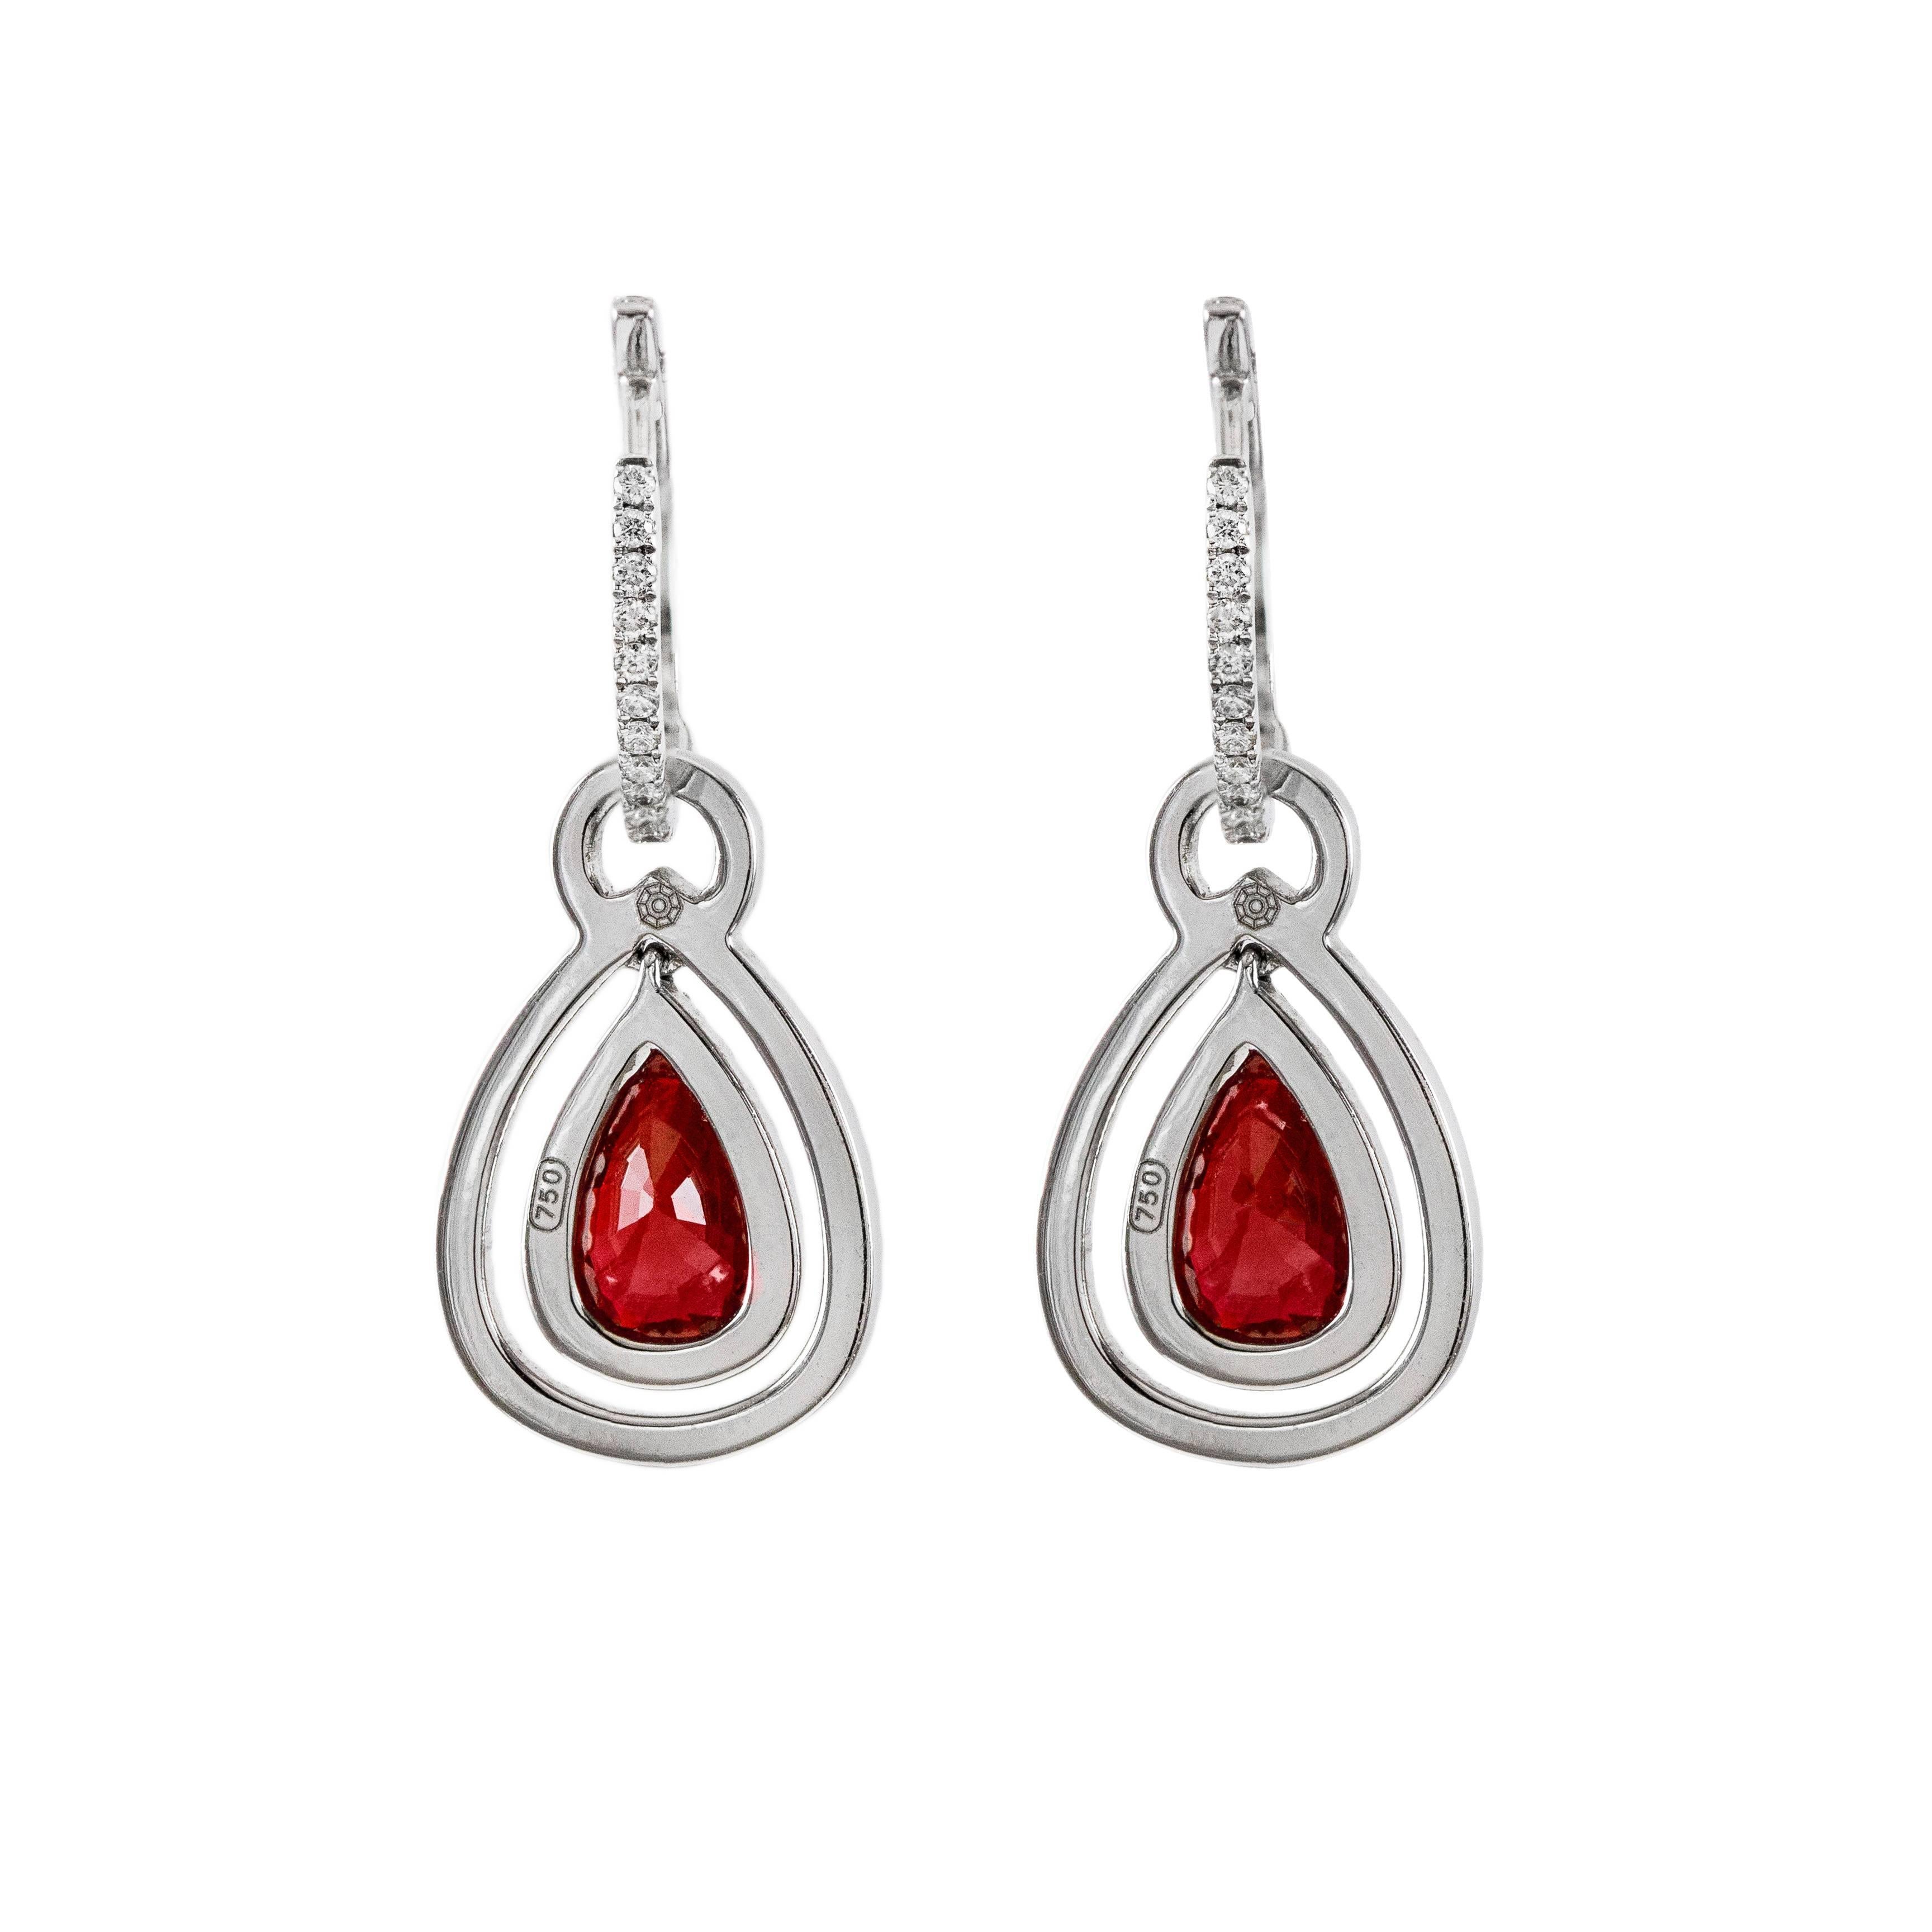 The 2 beautiful, eye clean rubies set on each earring weighs 2.08 carats total. These rubies are accented by 2 rows of brilliant round diamonds that go all the way up until the hinged earwire mechanism. The diamonds weigh 0.79 carats total. Made in